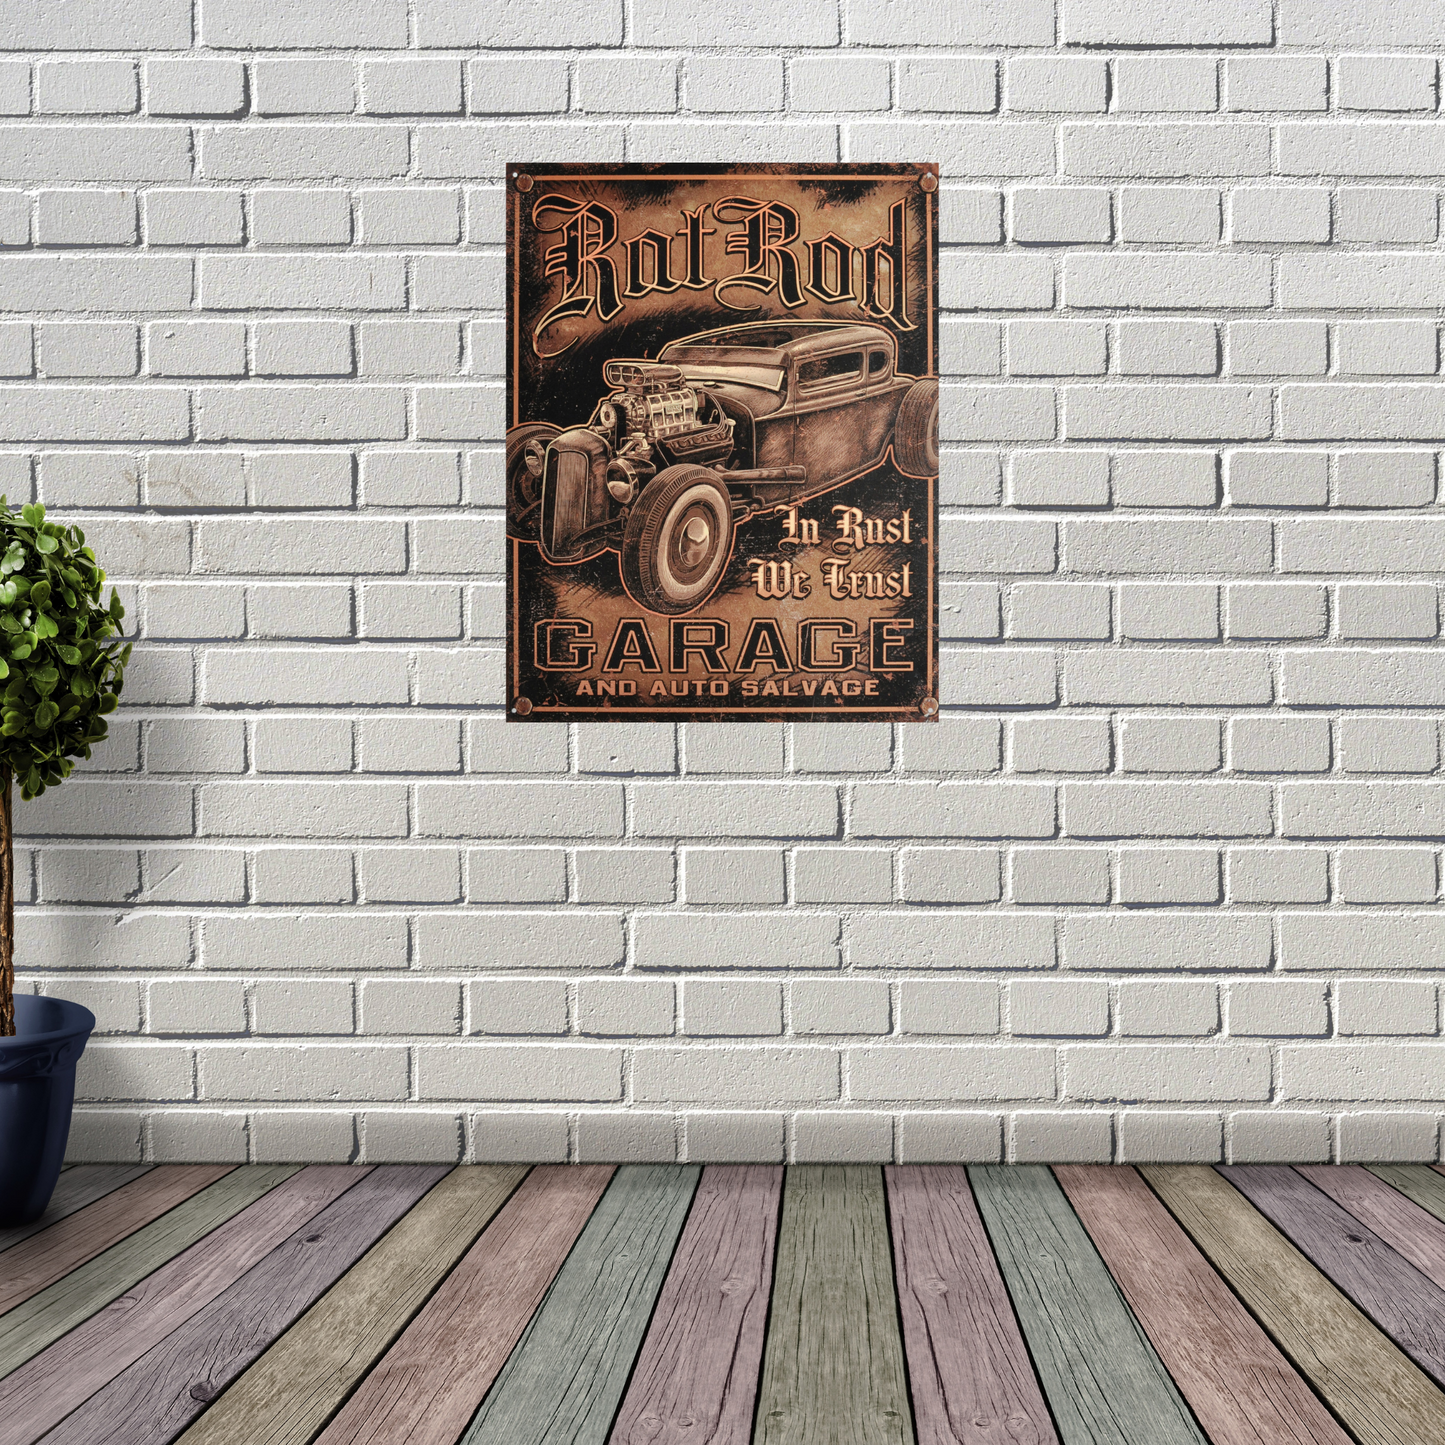 Vintage Poster Hot Rod Garage Vintage Print that Says, "Hot Rod, in Rust We Trust, Garage and auto salvage" in a rusty print finish. on a wall for scale.